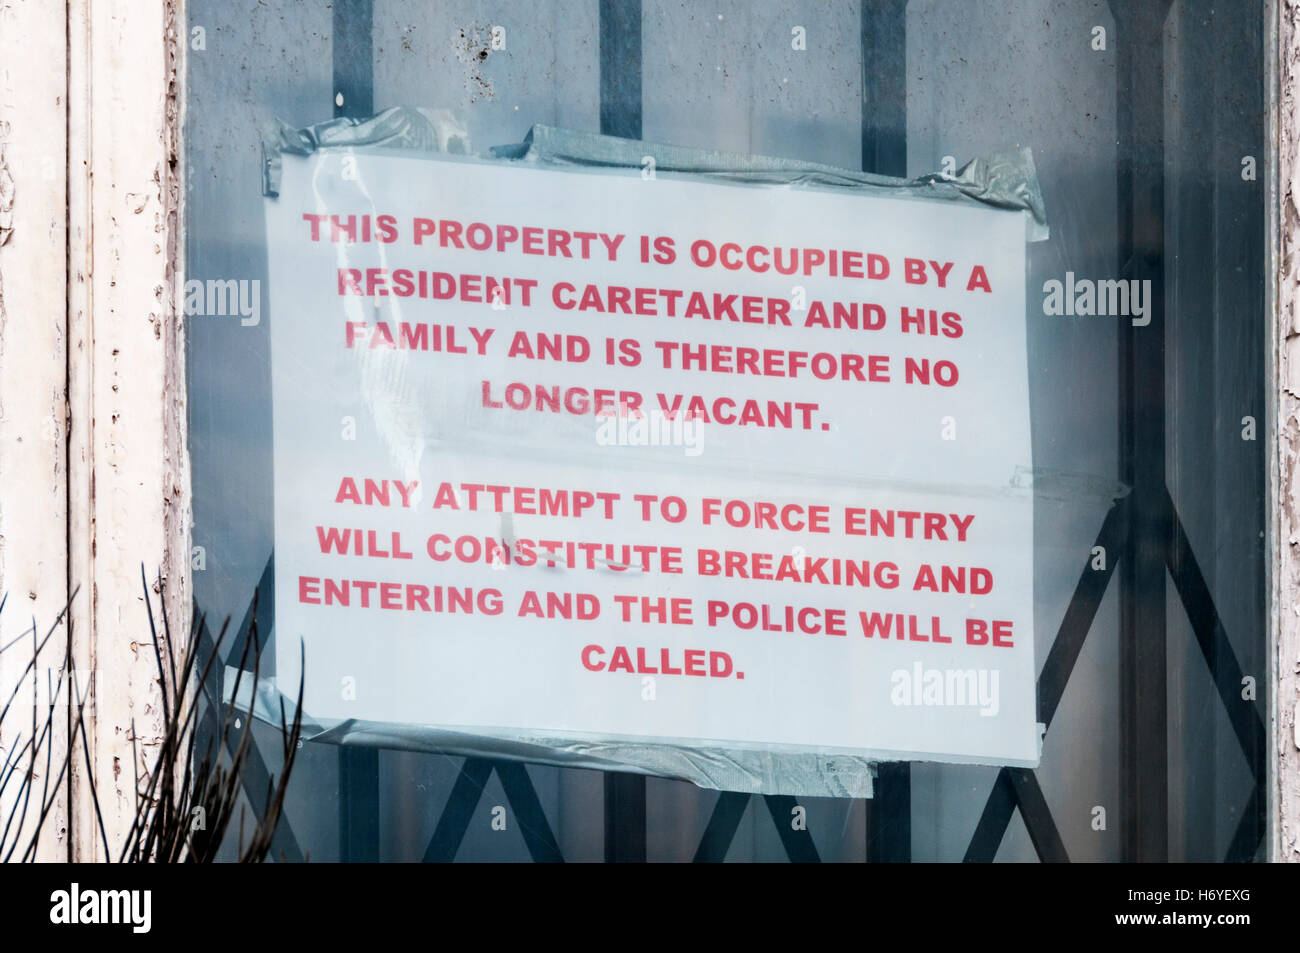 A sign in a window warns that a building is occupied by a resident caretaker and so cannot be squatted. Stock Photo